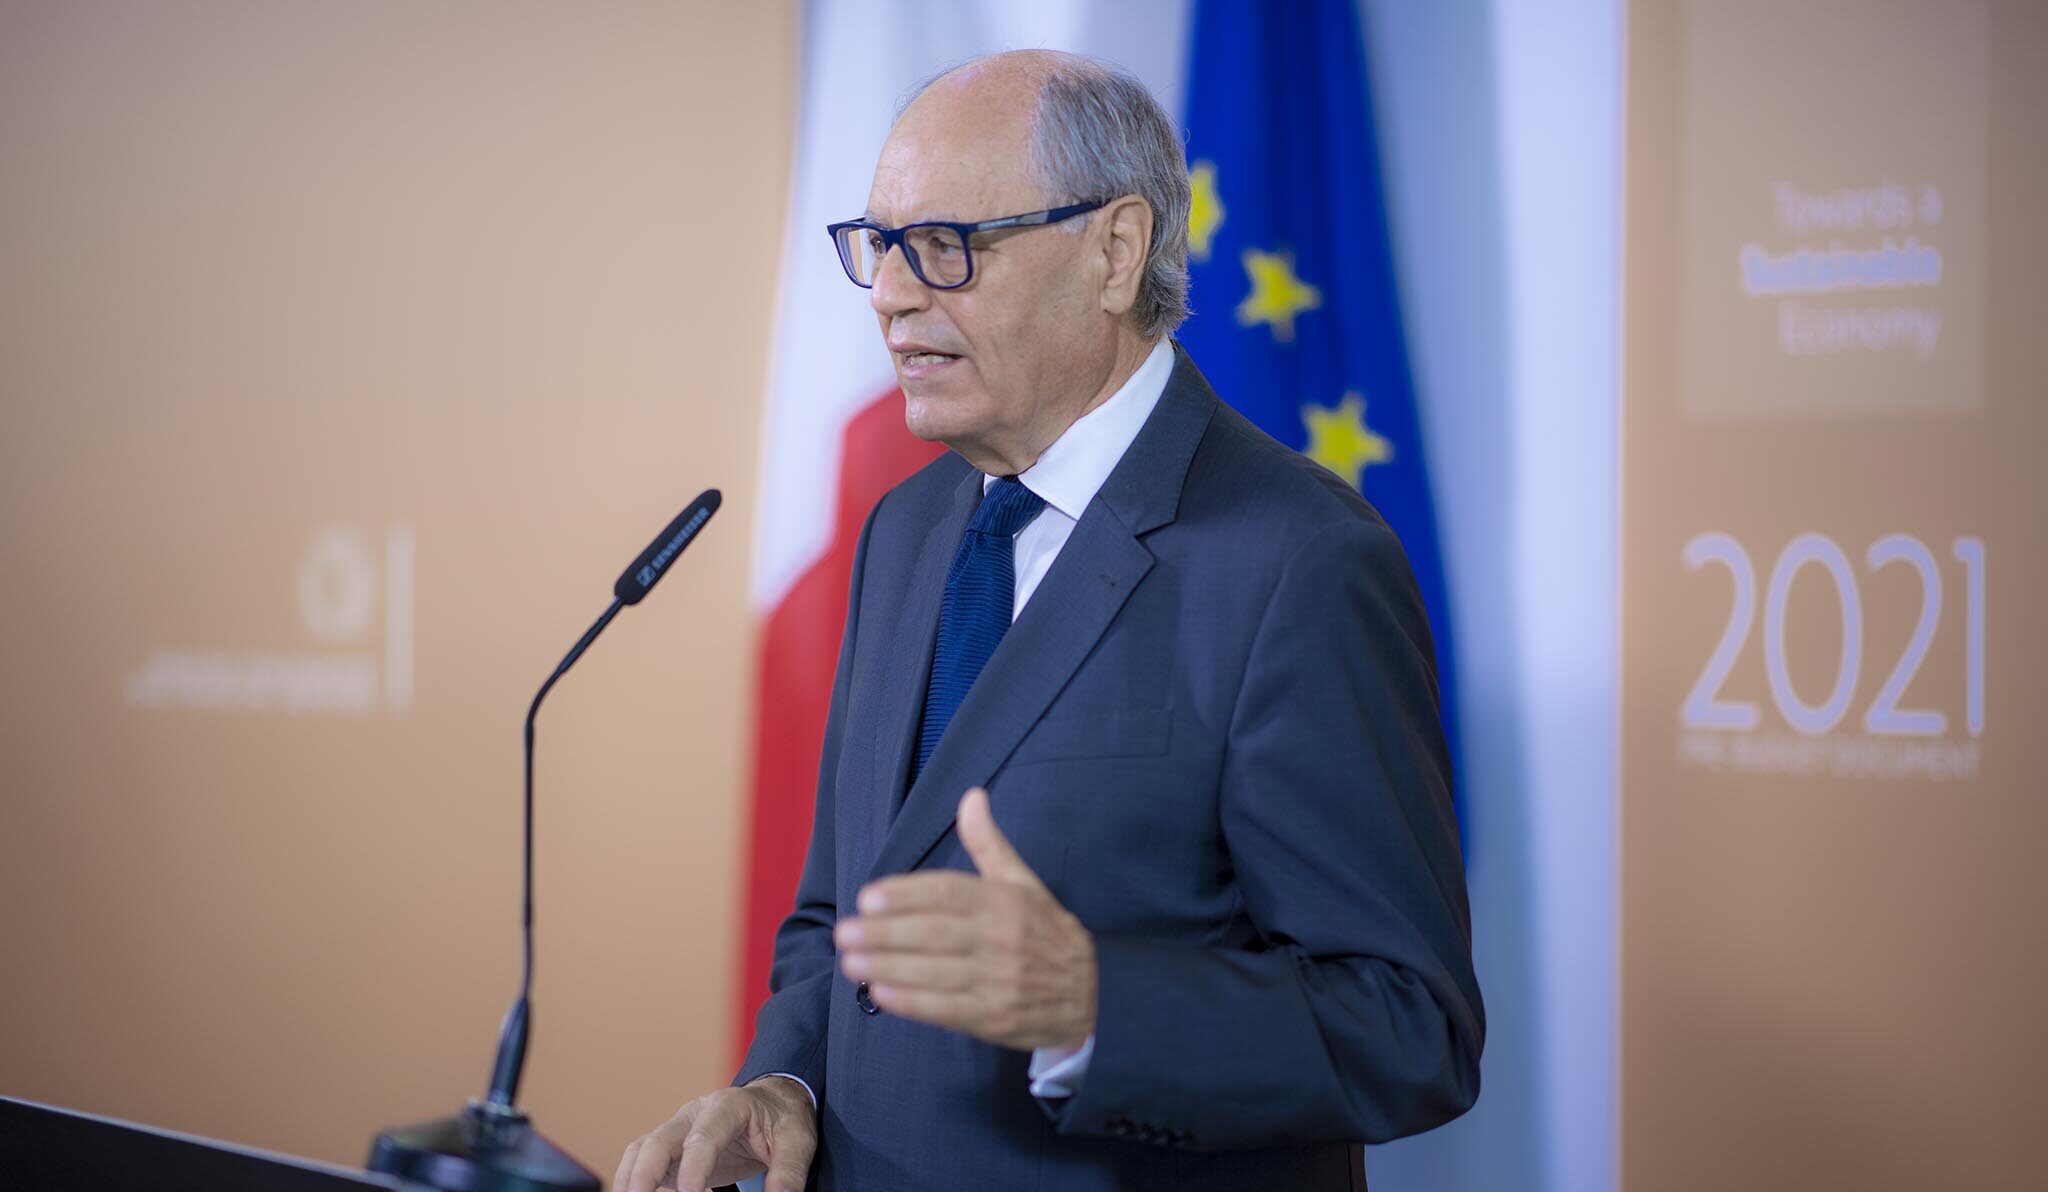 Edward Scicluna formally appointed as Central Bank governor